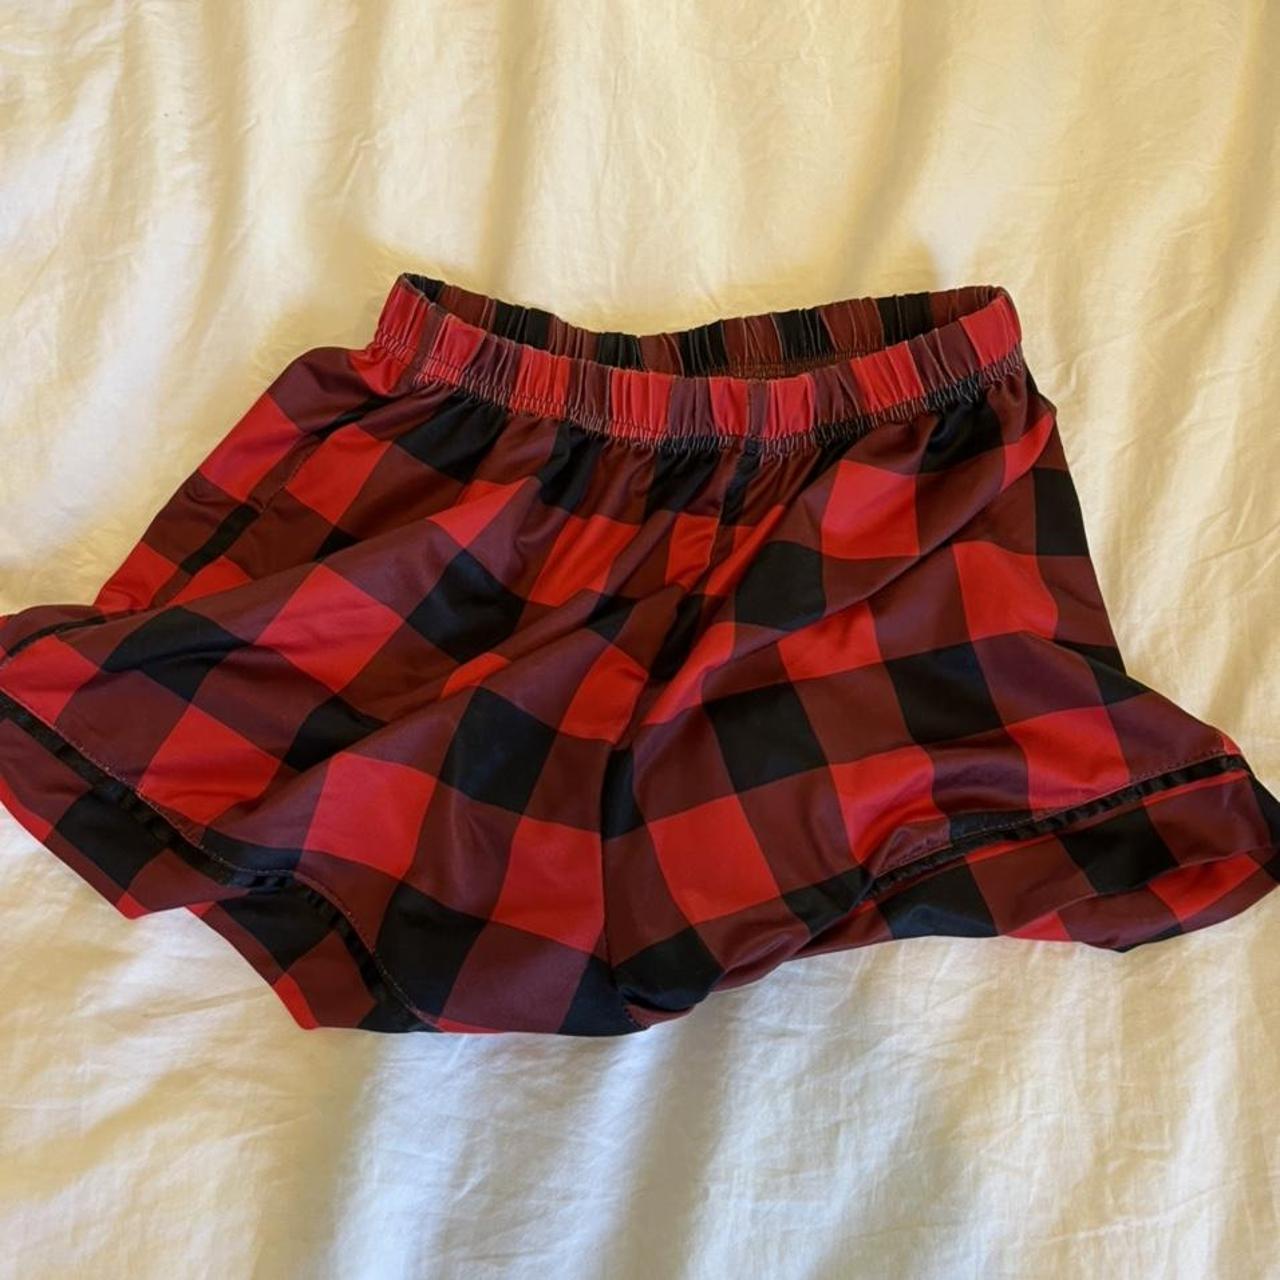 Plaid black and red pj sleep shorts size xs but fits... - Depop